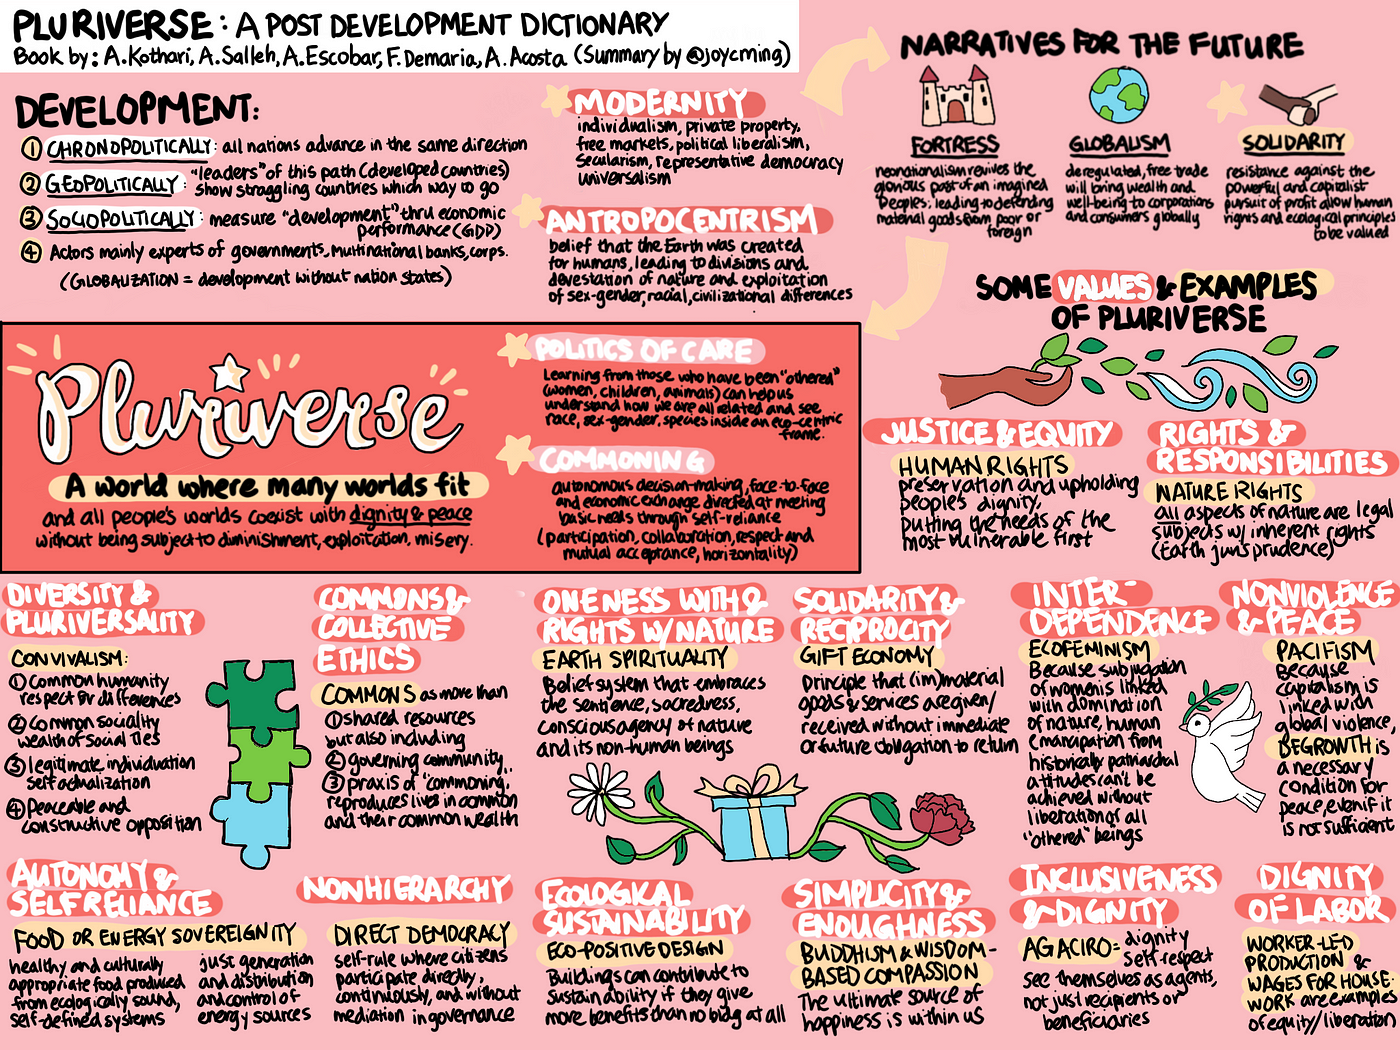 Visual summary of some of the concepts and definitions in the book Pluriverse. Please refer to the linked blogpost for a full transcription of the text in the image.